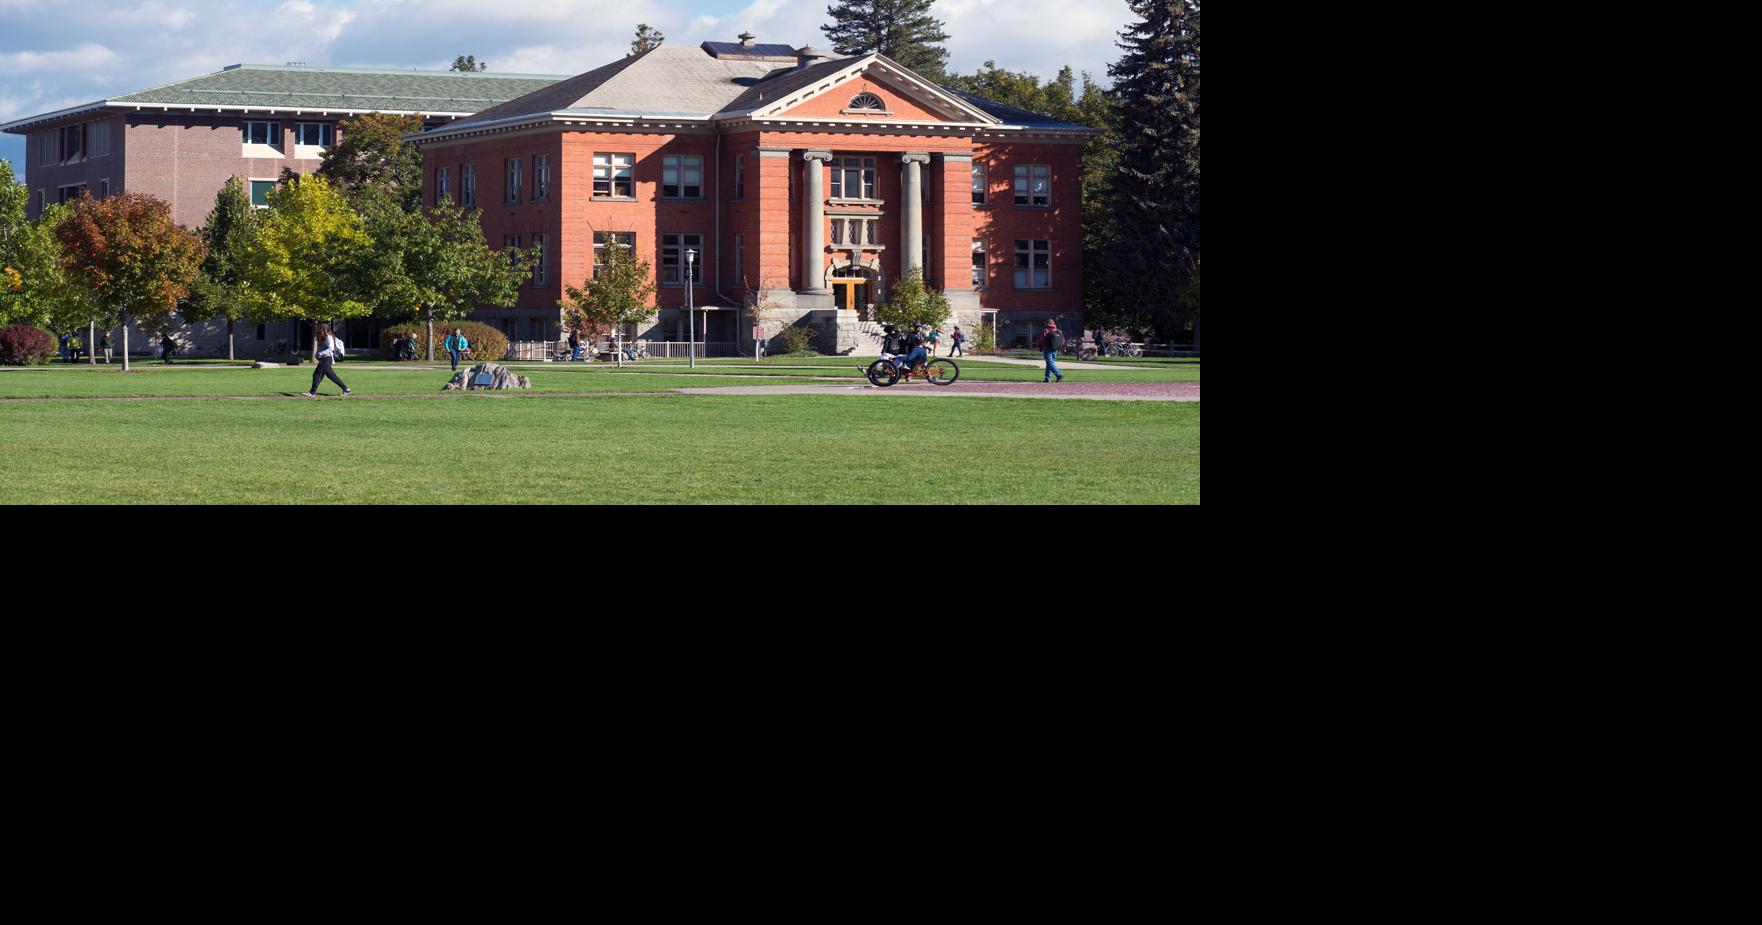 University of Montana on ‘real momentum’ with spring headcount